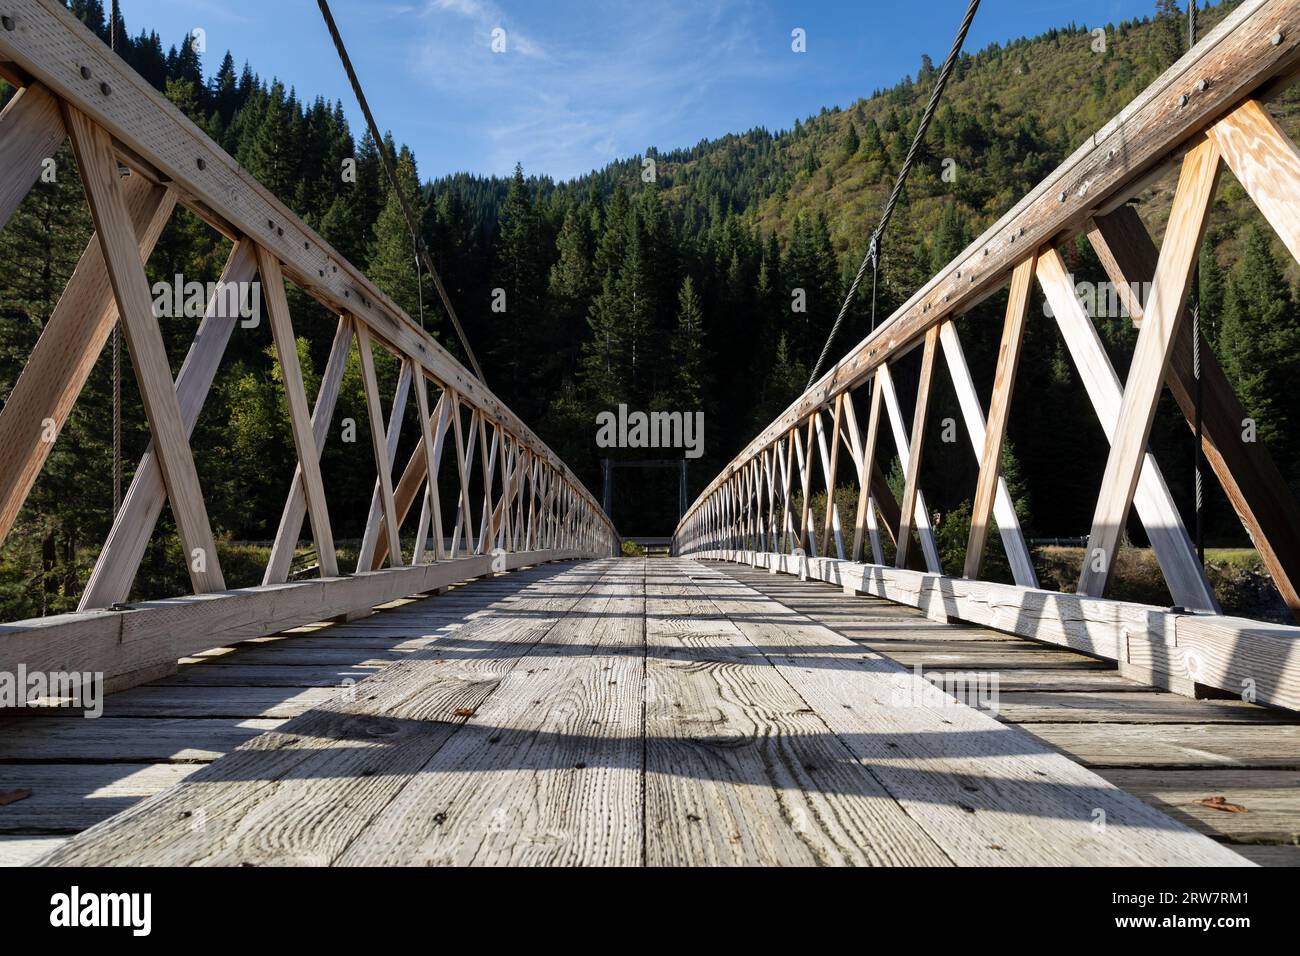 A pack bridge spans the Lochsa River at the Split Creek Trailhead in the Nez Perce-Clearwater National Forest, Idaho. Stock Photo